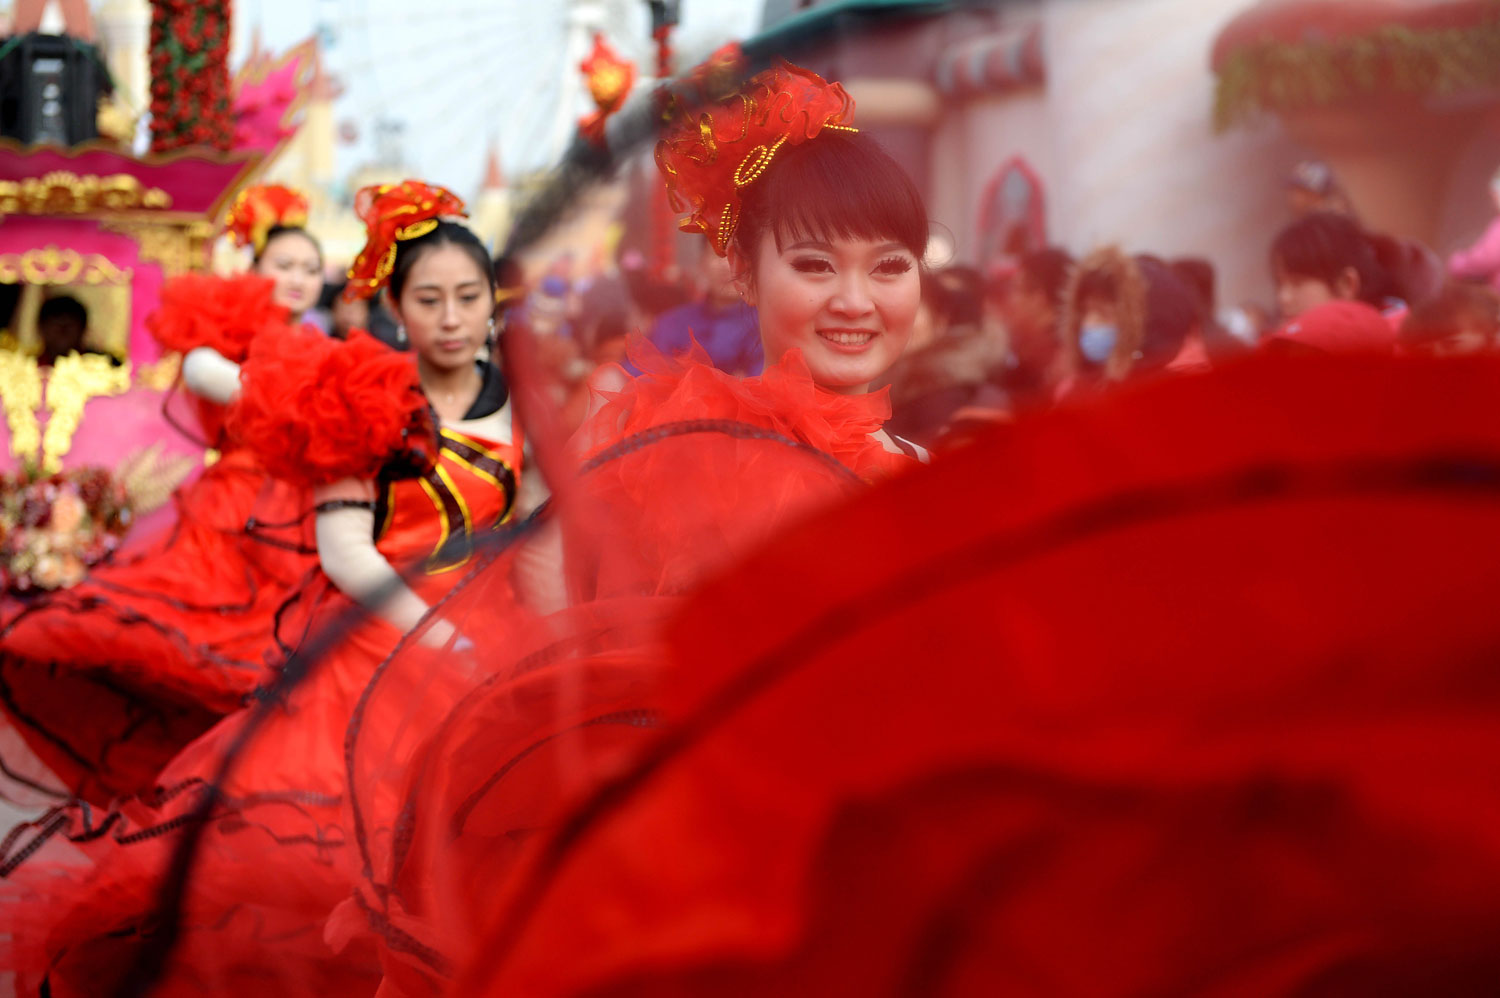 Performers dance during a temple fair to celebrate the Spring Festival, or the Chinese Lunar New Year, in Beijing, Jan. 31, 2014.